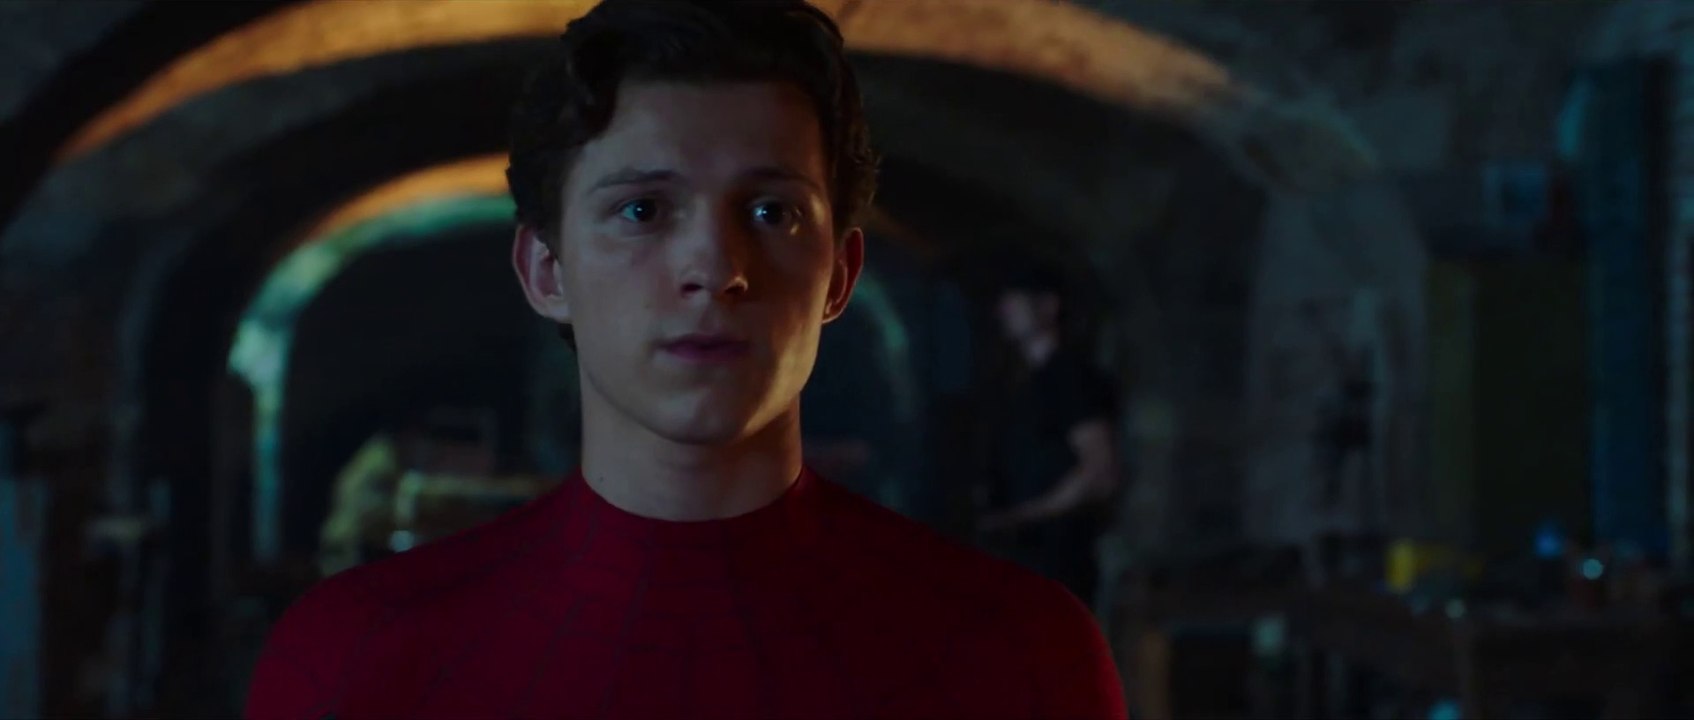 SPIDER-MAN FAR FROM HOME Trailer